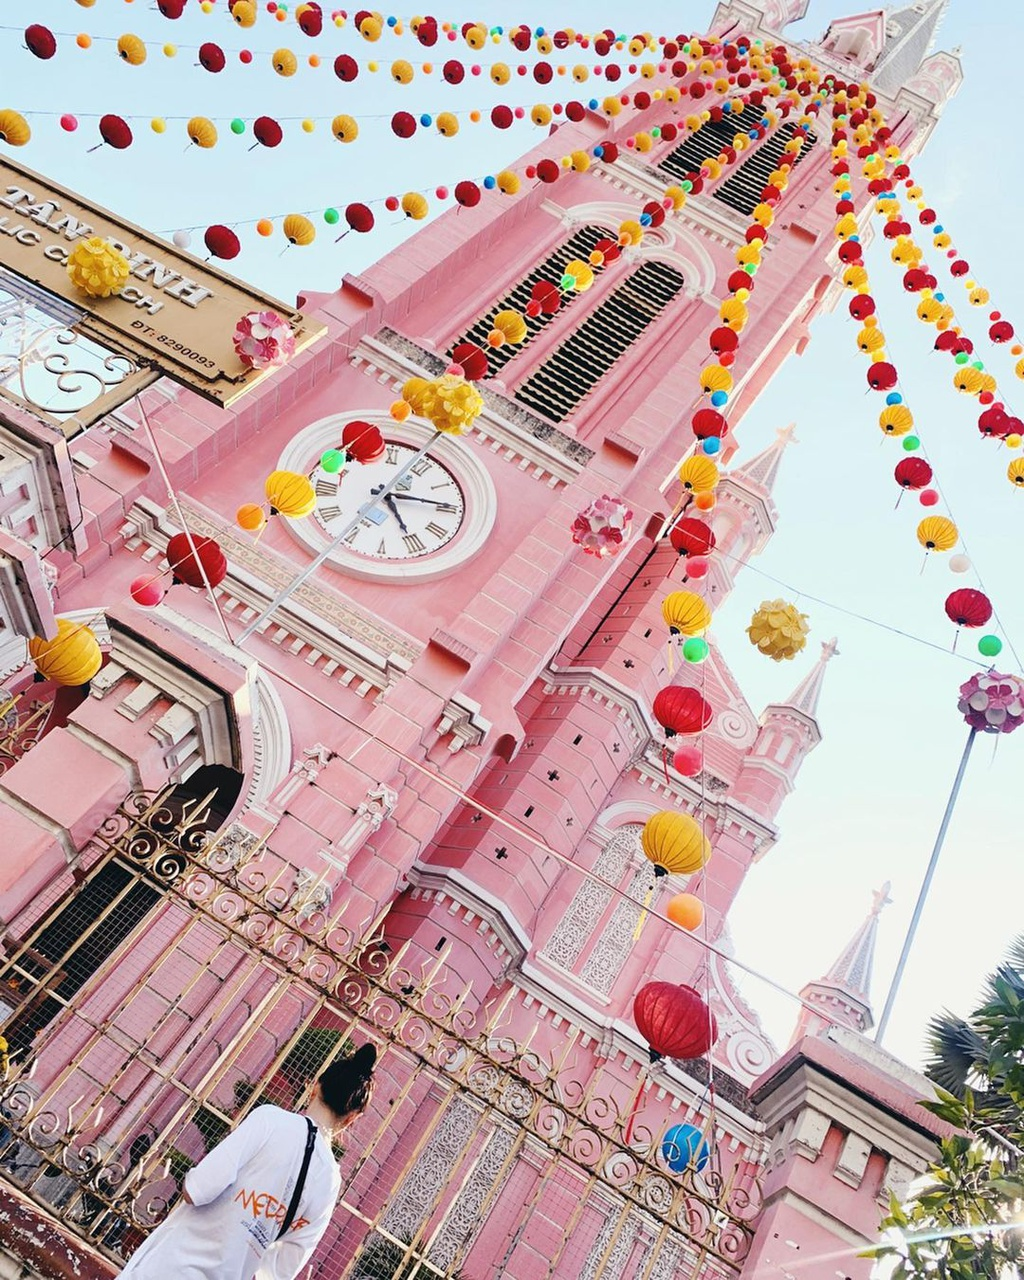 Hundred-year-old churches loved as stunning check-in sites in HCMC